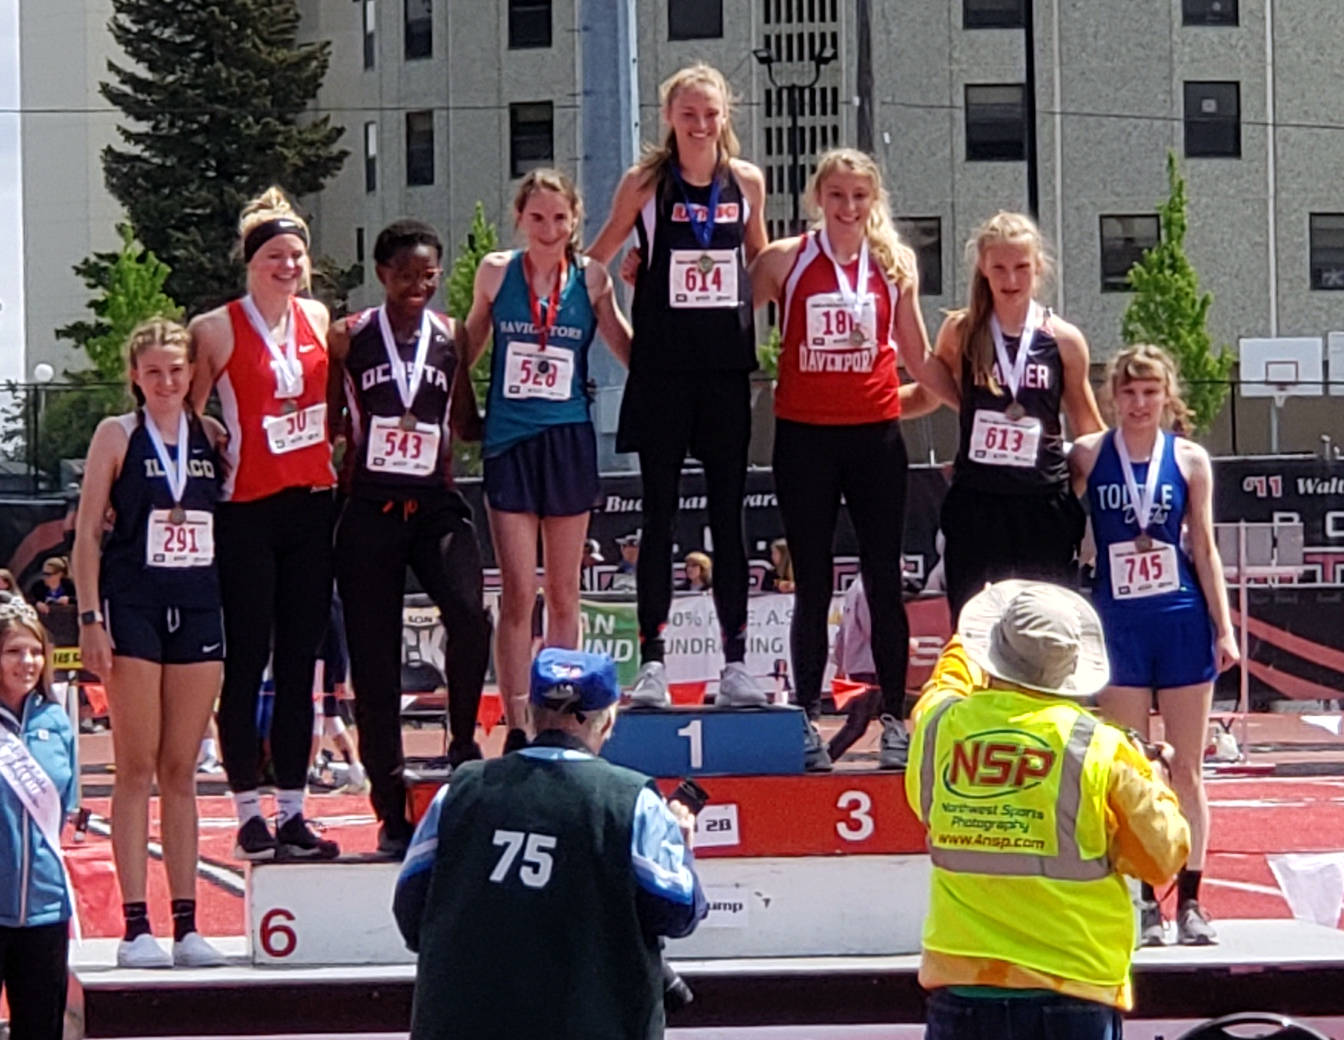 (Submitted photo) Raymond’s Kyra Gardner stands atop the podium after winning the 2B State championship in the high jump on Saturday at Eastern Washington University in Cheney.